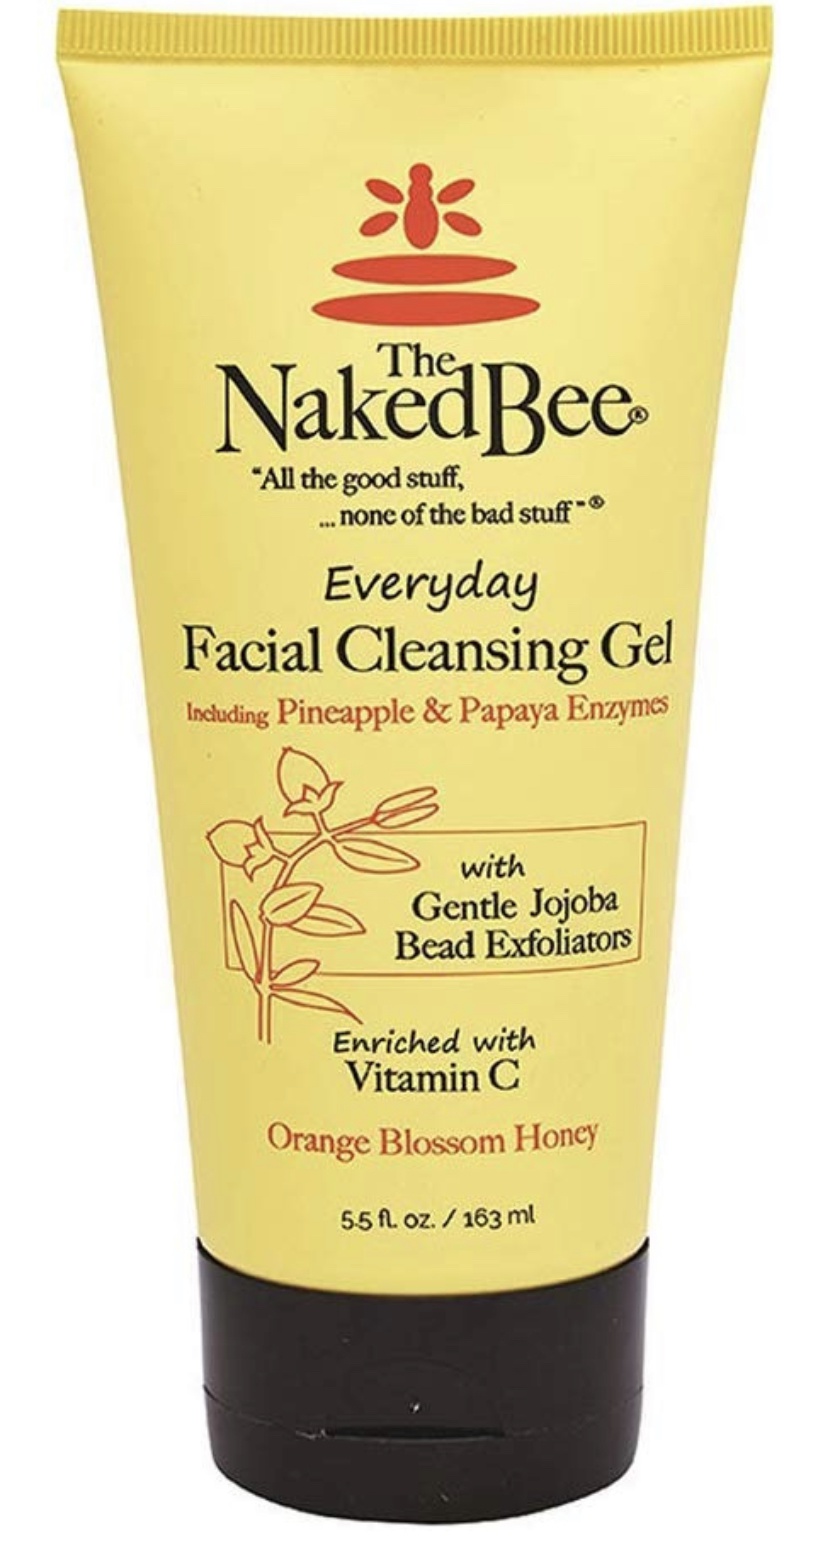 The Naked Bee Everyday Facial Cleansing Gel